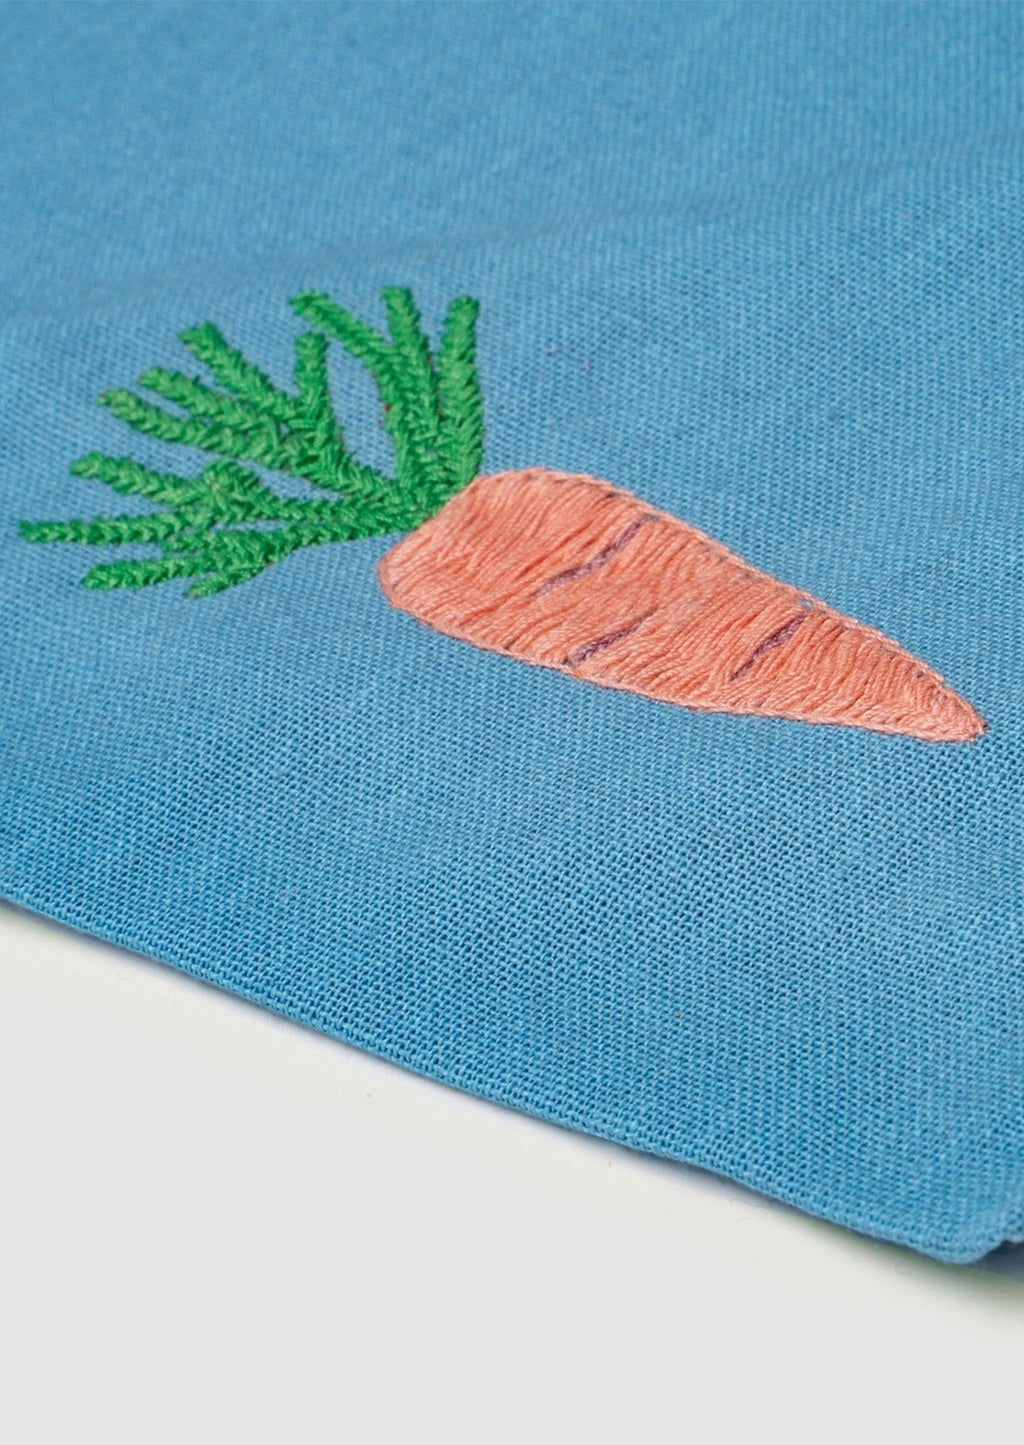 2: Carrot embroidery detailing.